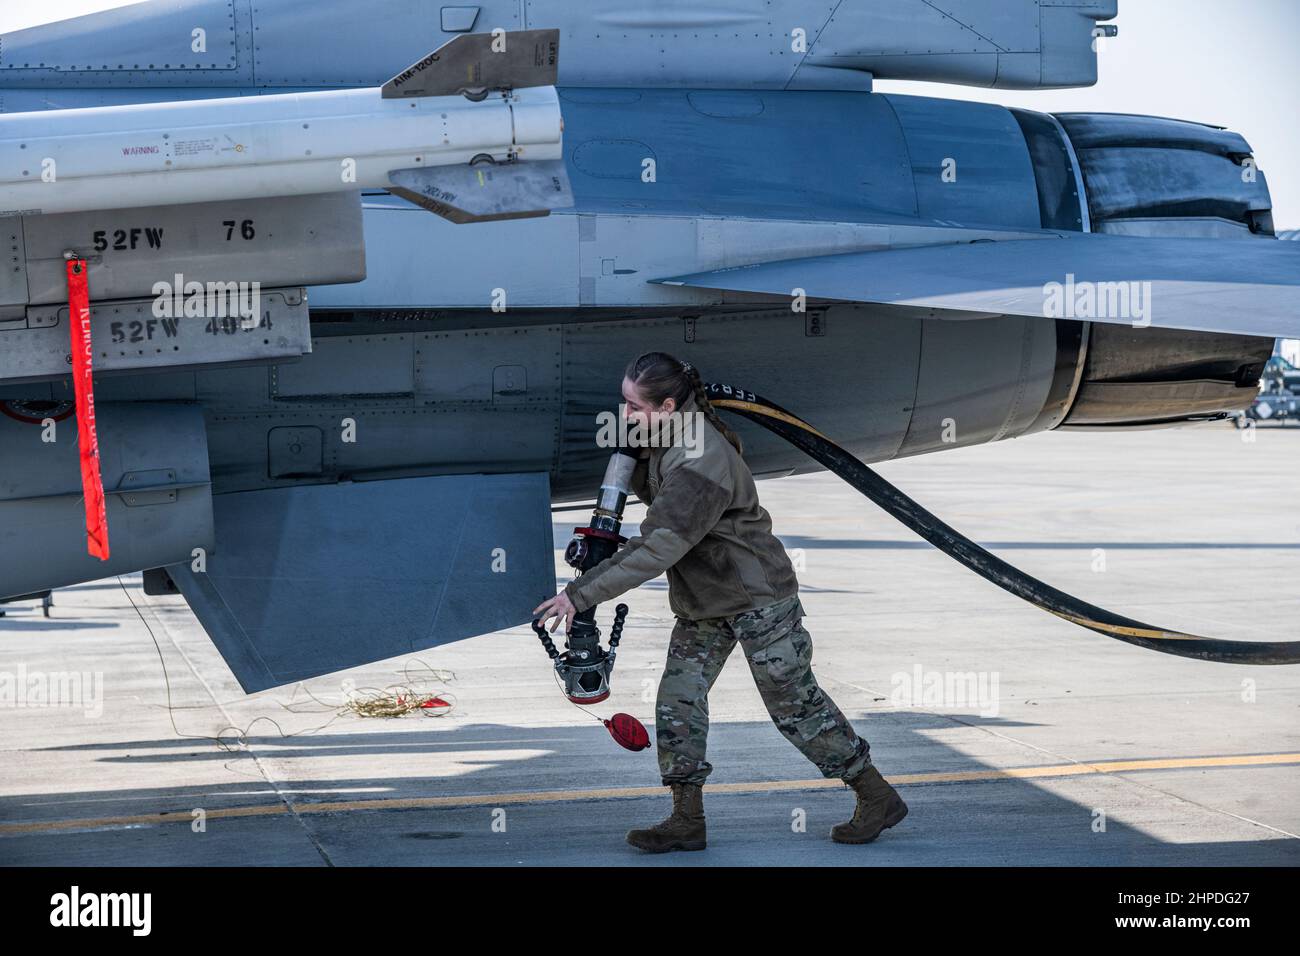 A U.S. Air Force Airman from the 480th Expeditionary Fighter Squadron petroleum, oils and lubricants flight at Spangdahlem Air Base, Germany, prepares to refuel an F-16 Fighting Falcon aircraft assigned to the 480th FS at the 86th Air Base, Romania, Feb. 17, 2022. U.S. forces in Europe live, train and operate with allies and partners from strategic locations across Europe that are critical for the timely and coordinated response during peacetime and crises. (U.S. Air Force photo by Senior Airman Ali Stewart) Stock Photo